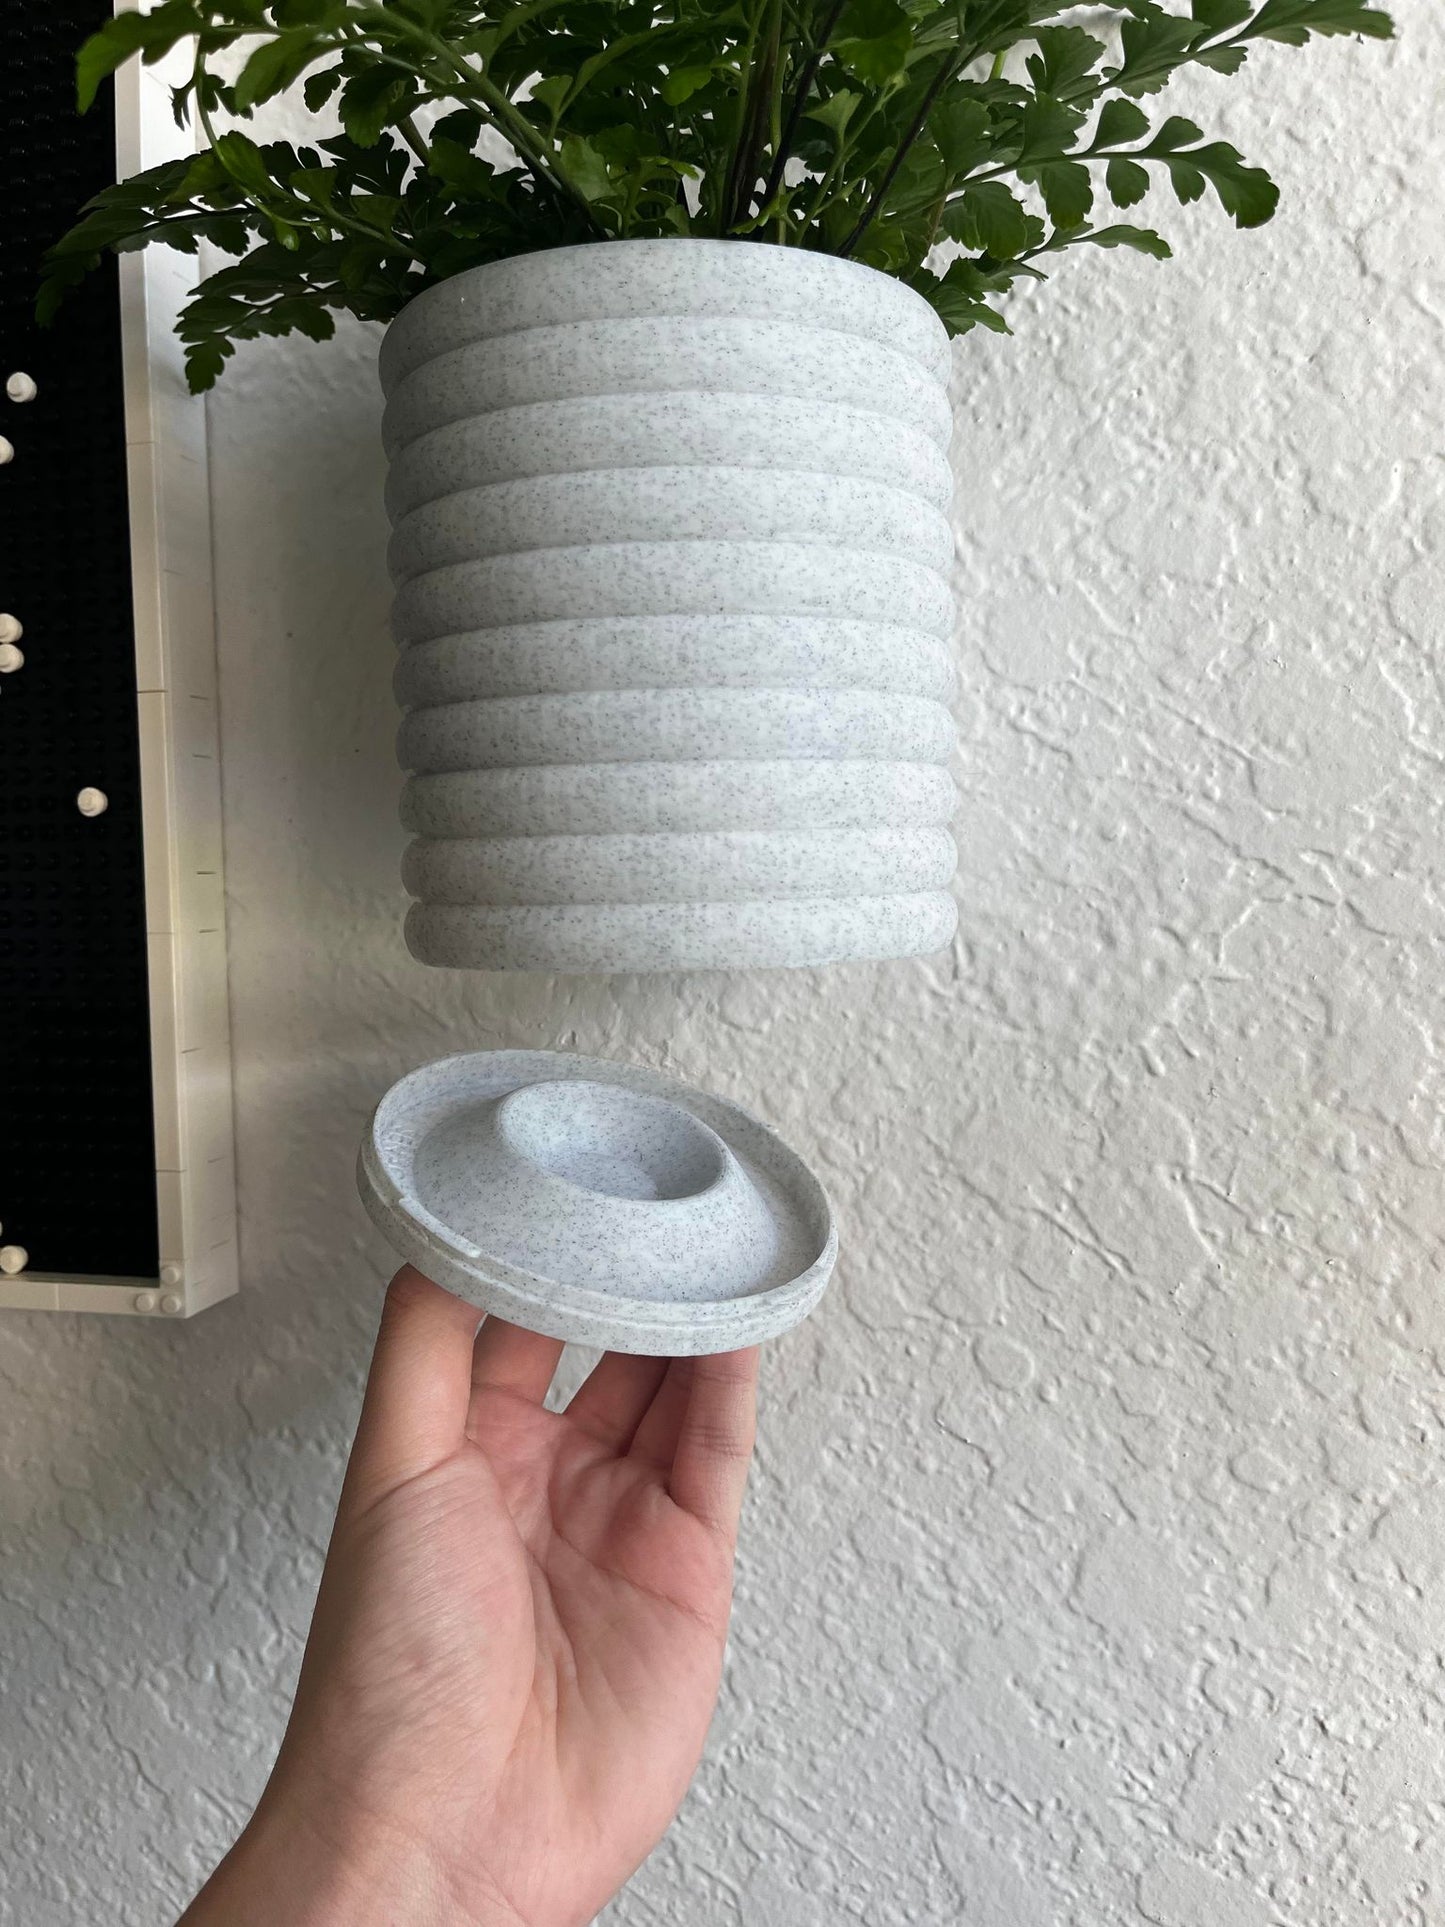 Wall Mounted Planter - NO DRILLING - Planter Stand, Potted Plant Wall, Decorative Indoor Wall Plant Holder, 3D Printed Wall Planter, Houseplant Wall Display Ideas - 4 Inches